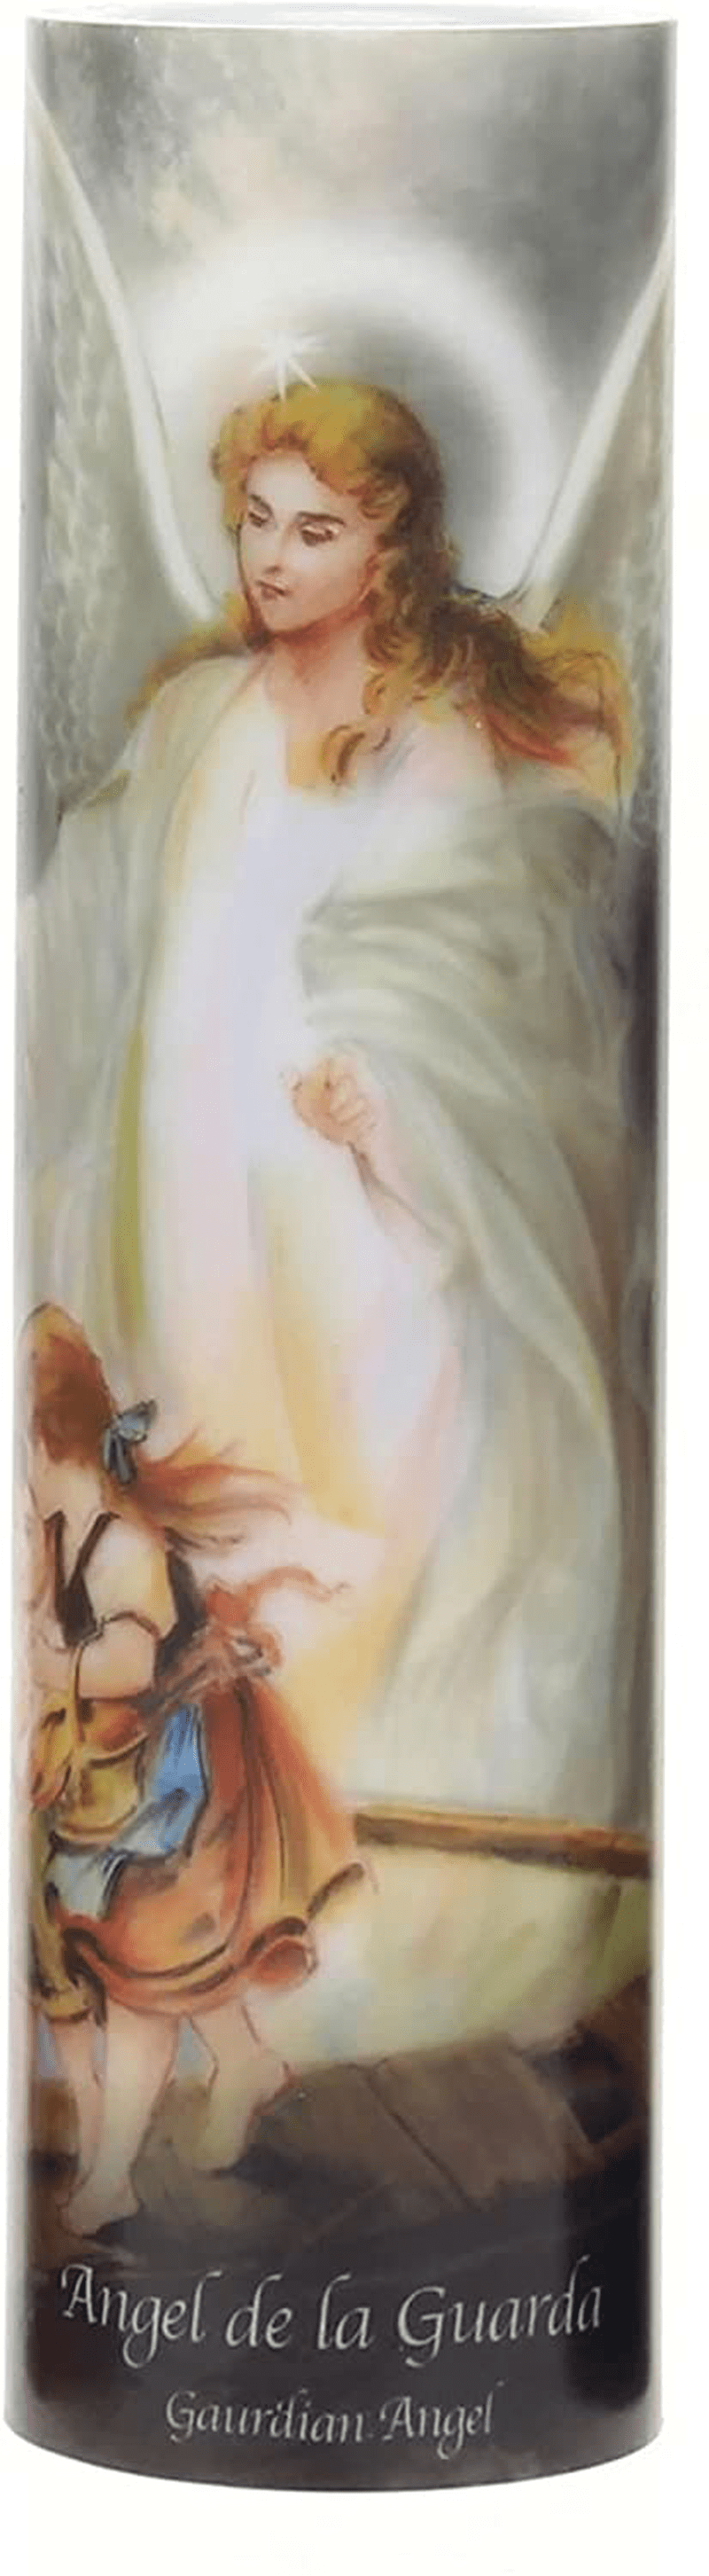 Virgin of Guadalupe Flameless LED Prayer Candle, Unique Religious Decoration, Gift Idea for Mothers Day, Birthday, or Any Holiday Home & Garden > Decor > Home Fragrances > Candles Stonebriar Guardian Angel  